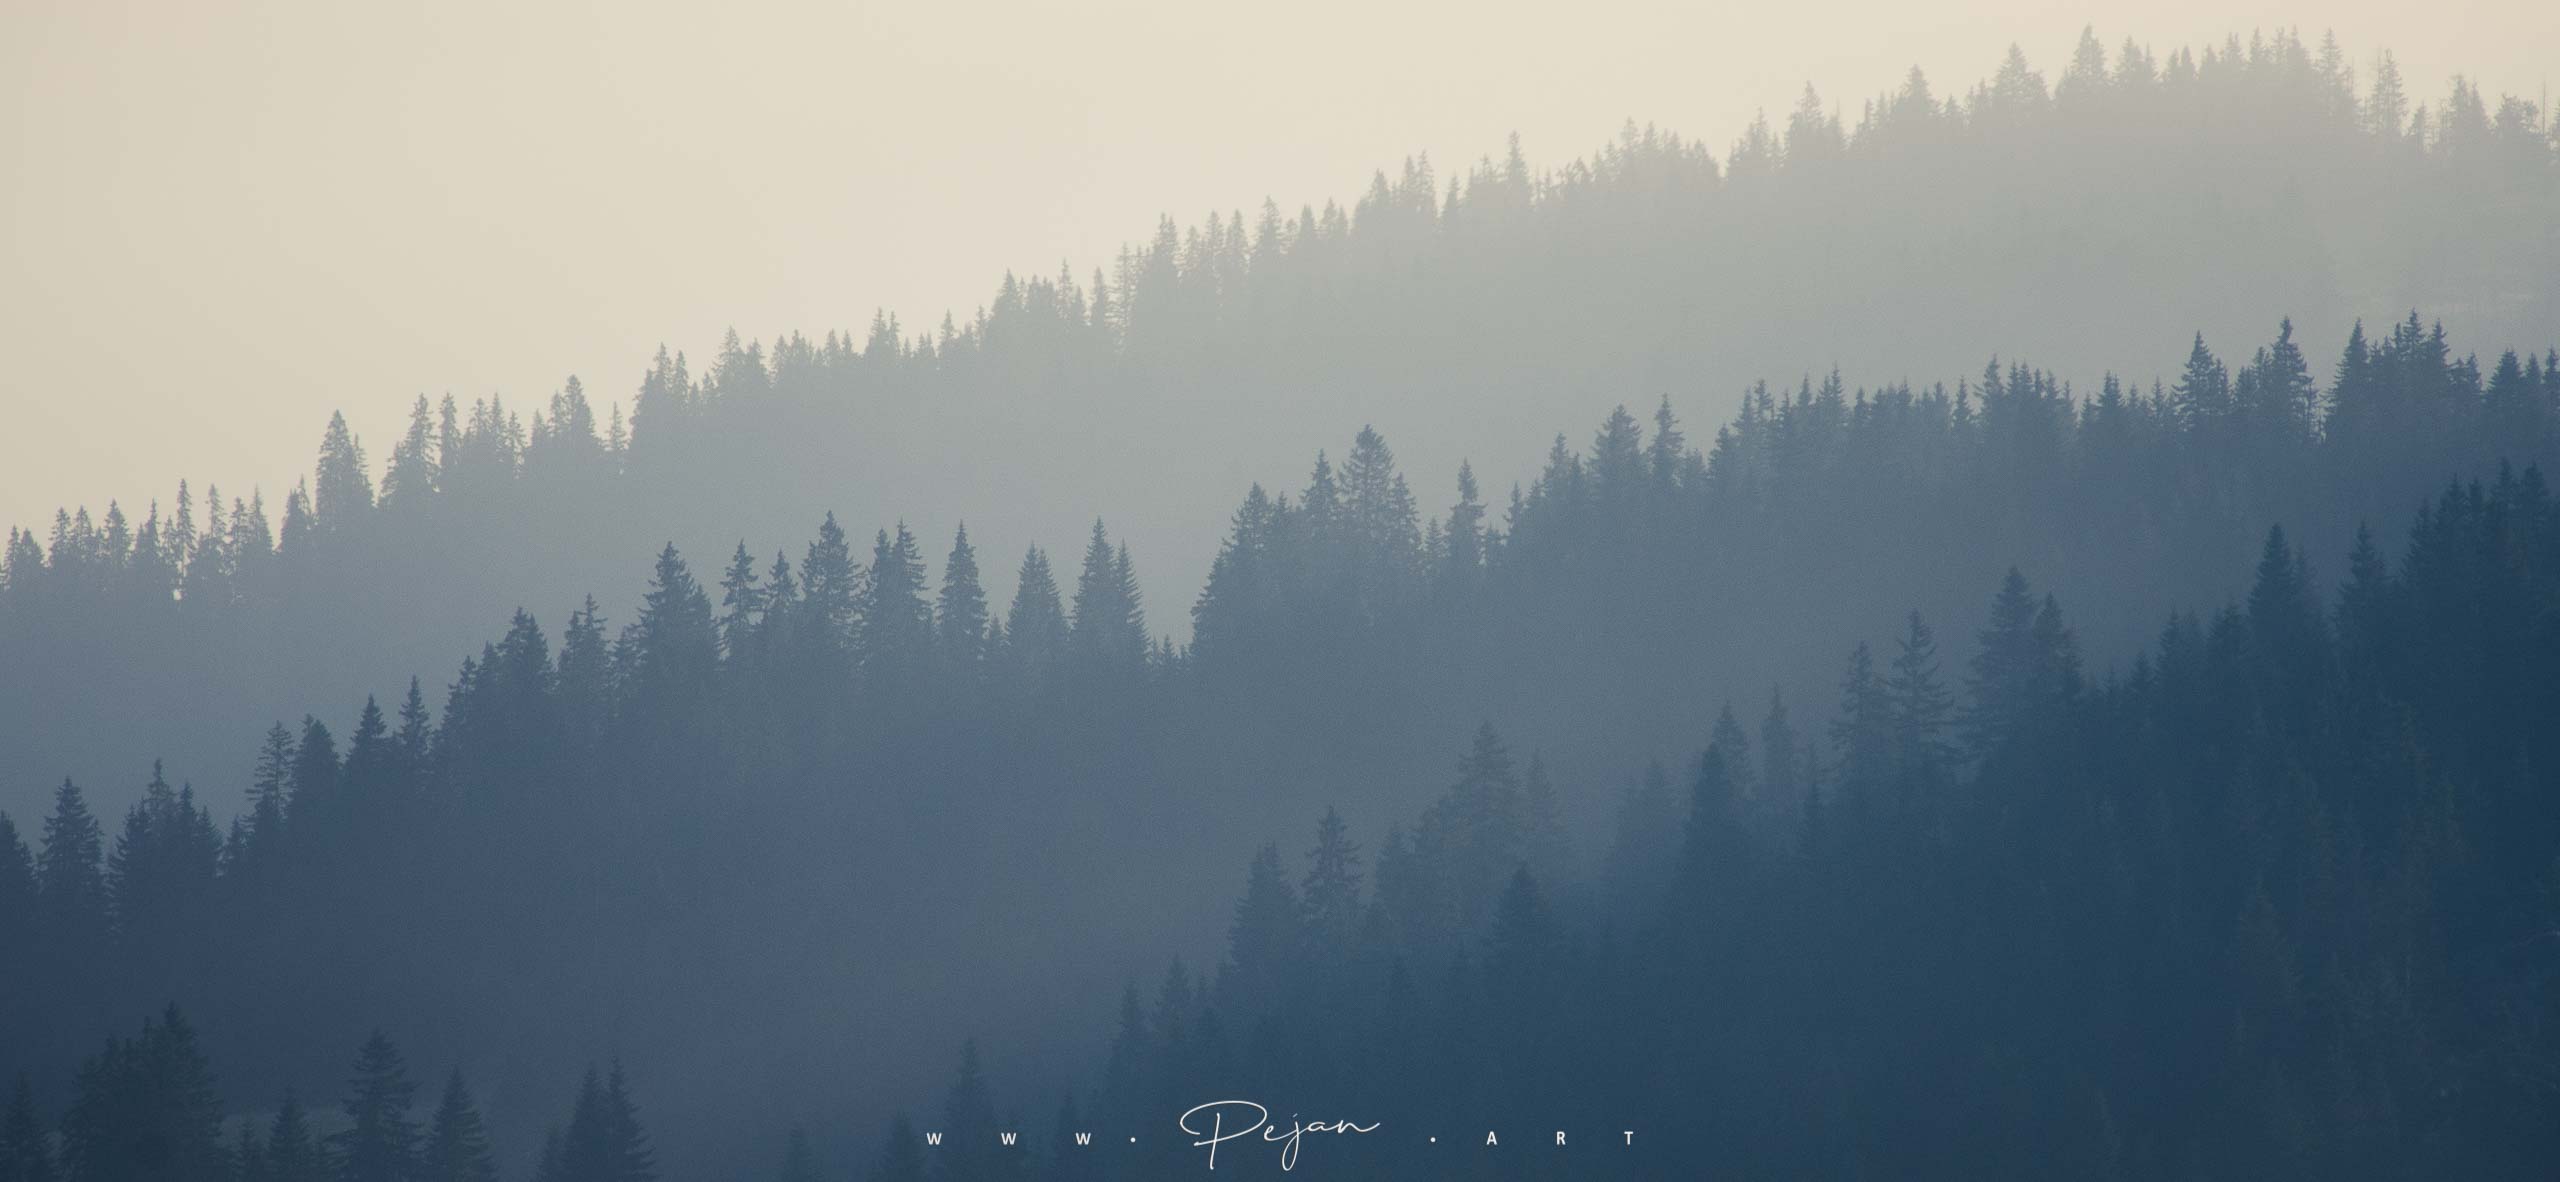 Gradient of blue, view of the mountain forests between Montenegro and Kosovo. Silhouettes of fir trees in the mist.